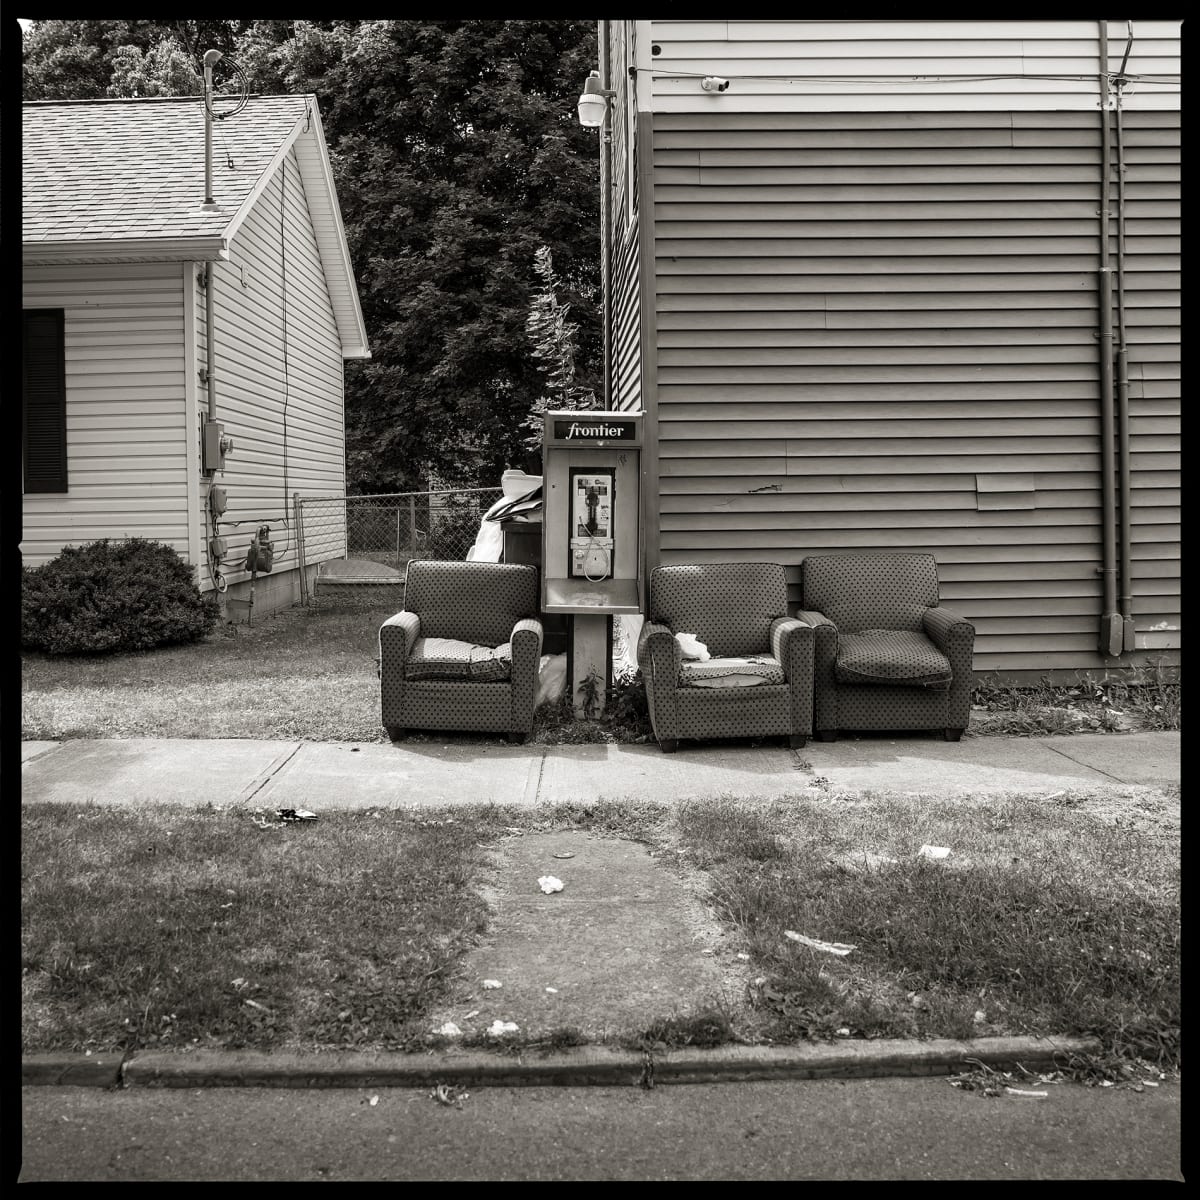 585.235.9196 – Grape and Orange Mini Mart, 111 Orange Street, Rochester, NY 14611 by Eric T. Kunsman  Image: ID: A black and white image shows a payphone in front of two buildings.  Around the payphones are three armchairs behind the side walk.